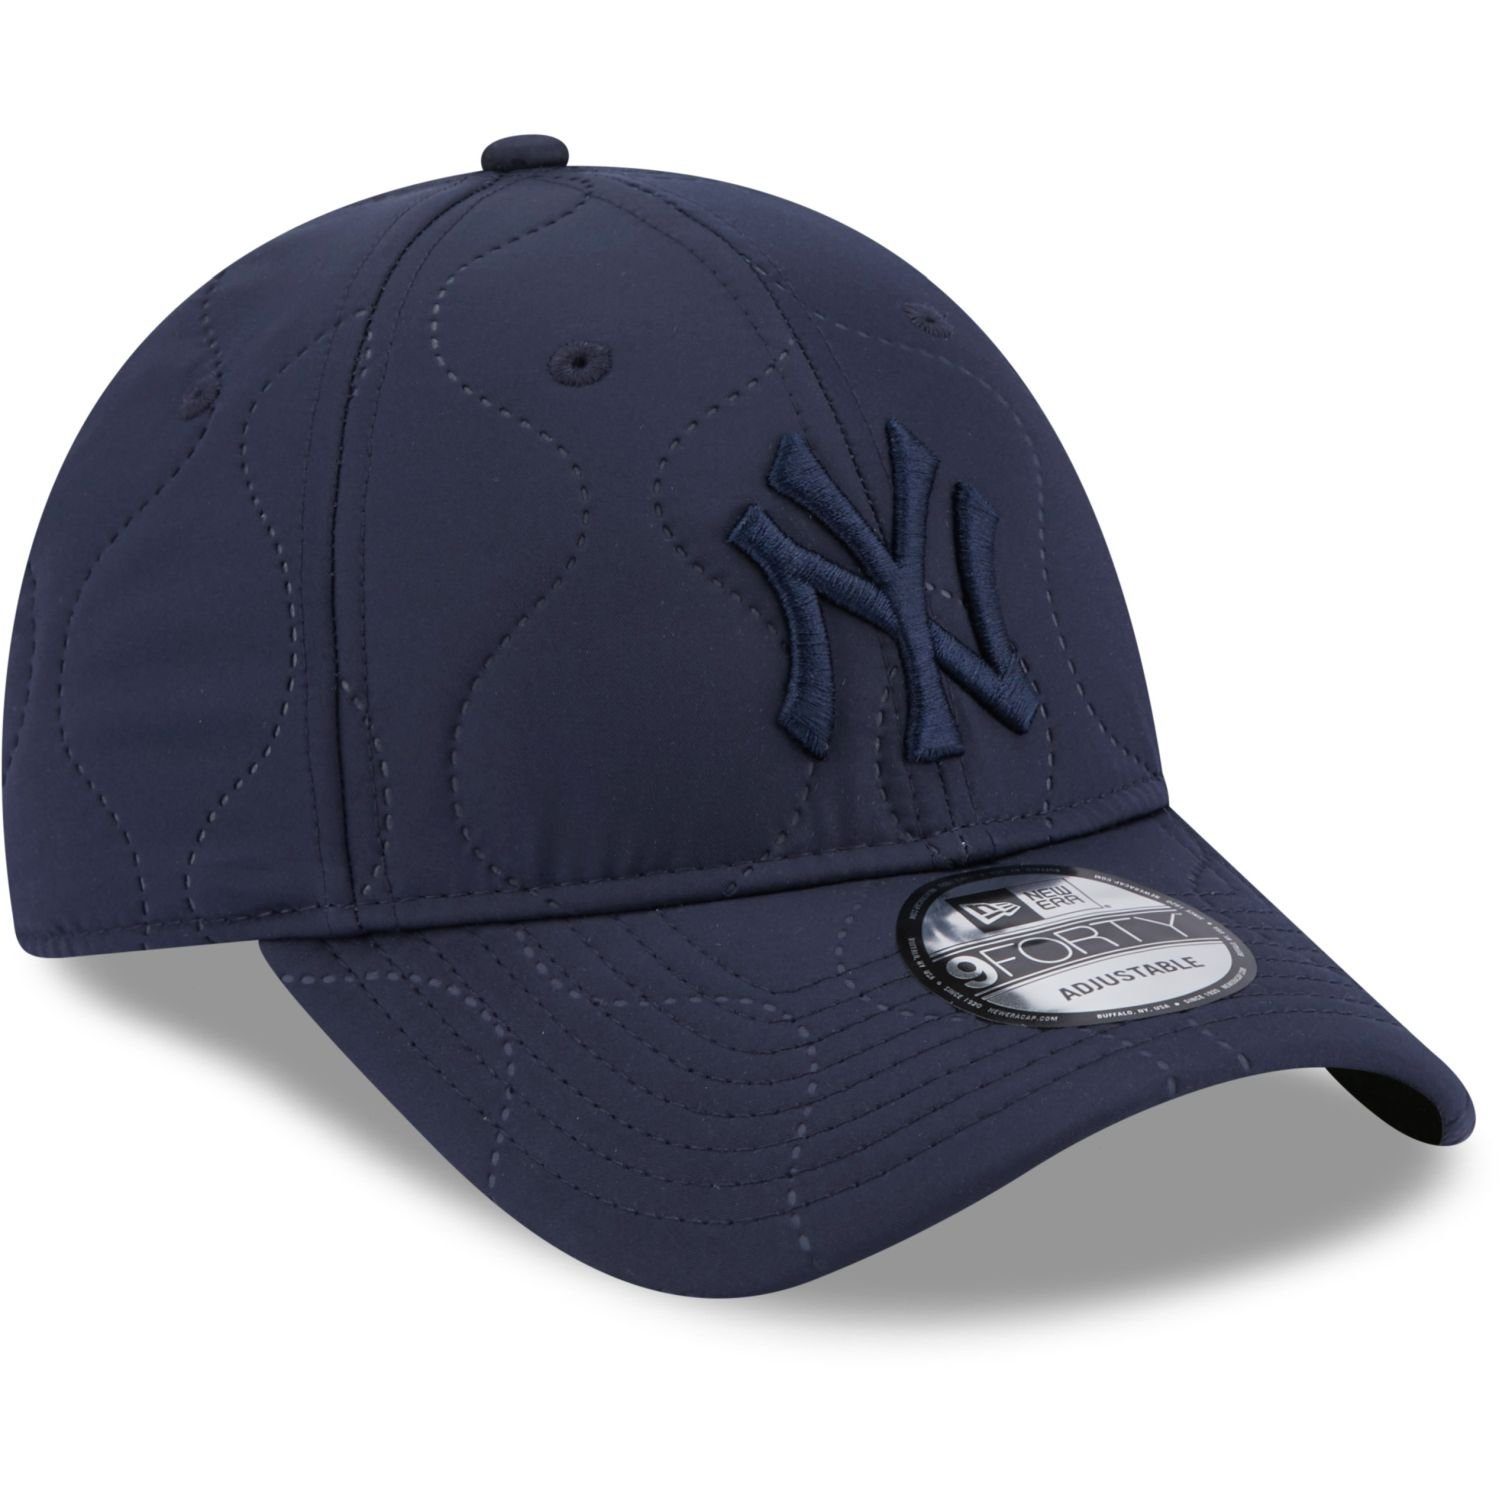 New Cap York Era New ClipBack Yankees Trucker 9Forty QUILTED